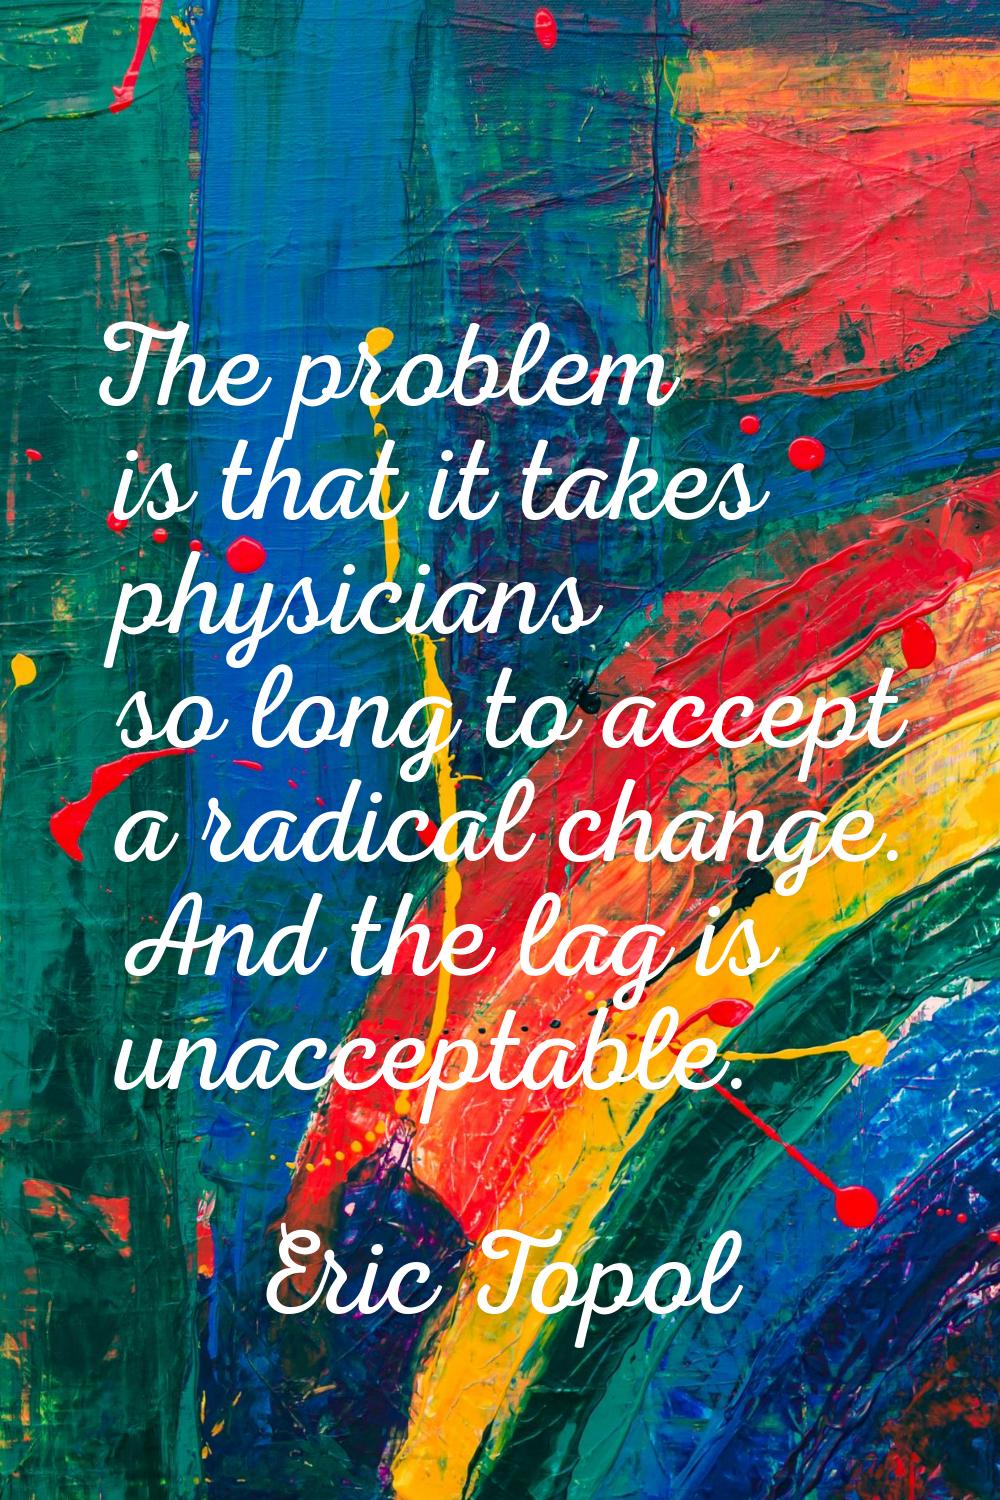 The problem is that it takes physicians so long to accept a radical change. And the lag is unaccept